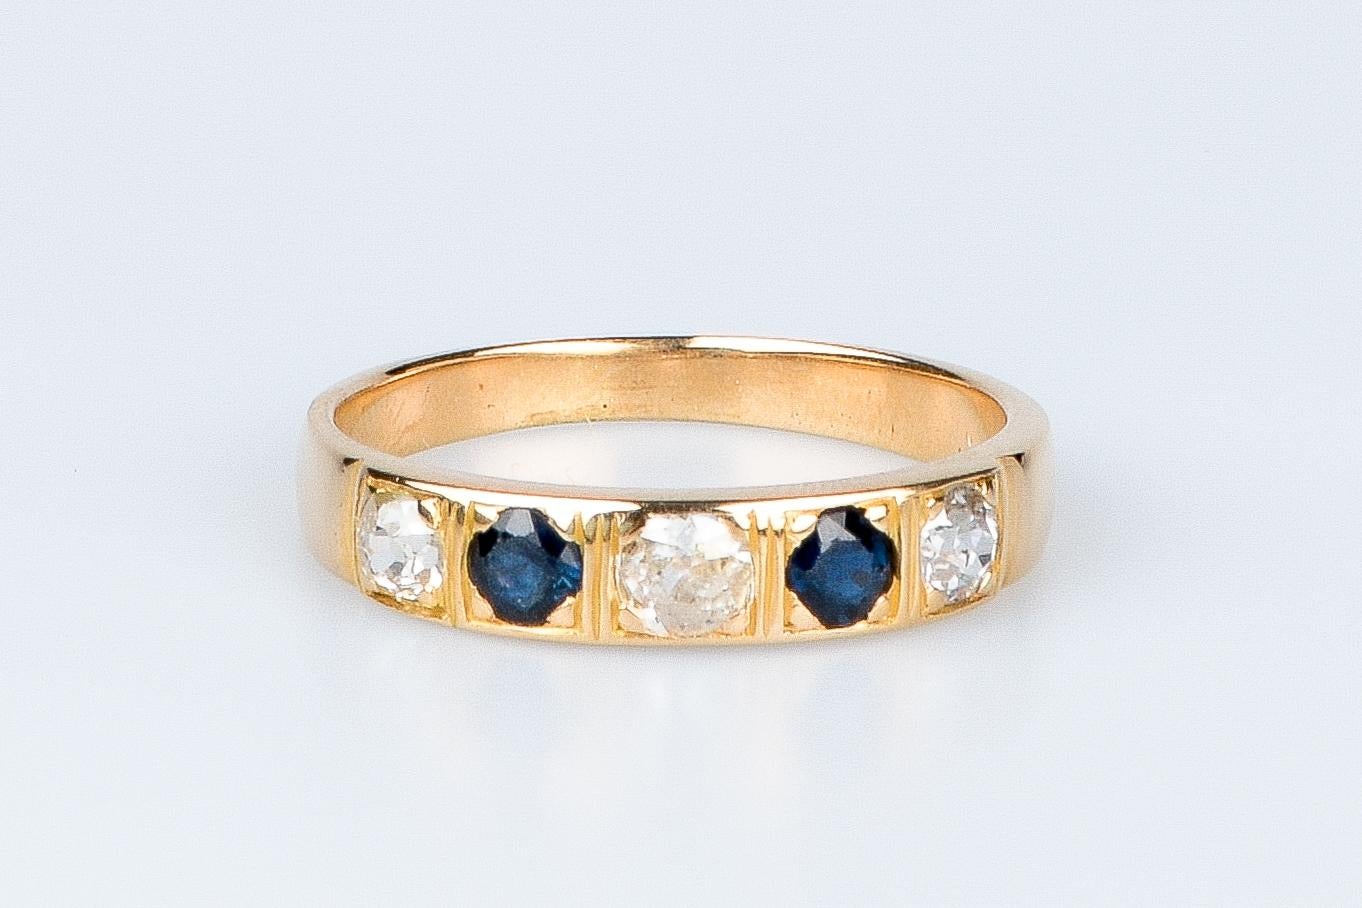 18 carat yellow gold ring designed with 3 round brilliant cut diamonds weighing 0.27 carat and 2 round sapphires weighing 0.12 carat.

Quality of the diamond
Color: H
Clarity: SI

Weight: 3.80 gr. 

Size: EU: 57 - ESP/IT: 17 - US: 8

Dimensions :